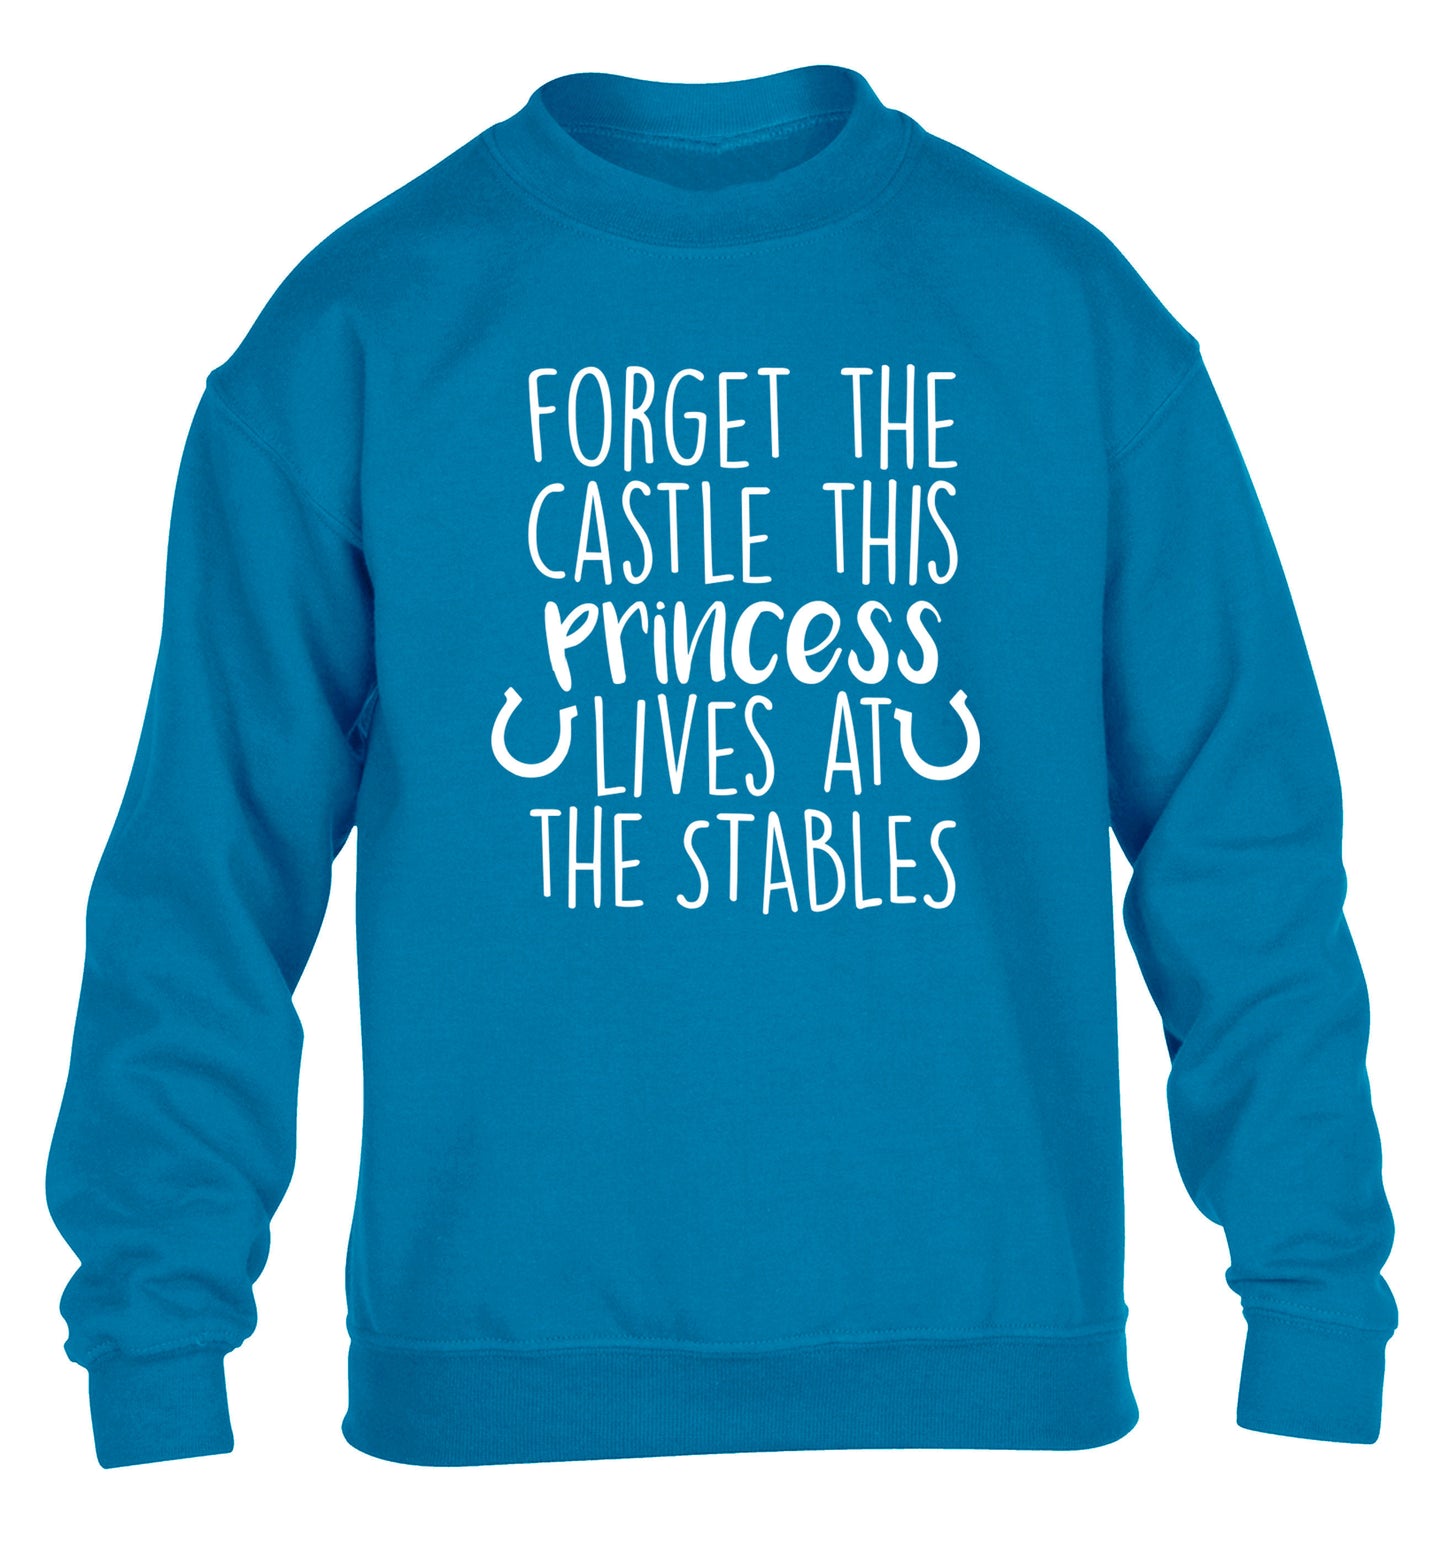 Forget the castle this princess lives at the stables children's blue sweater 12-14 Years